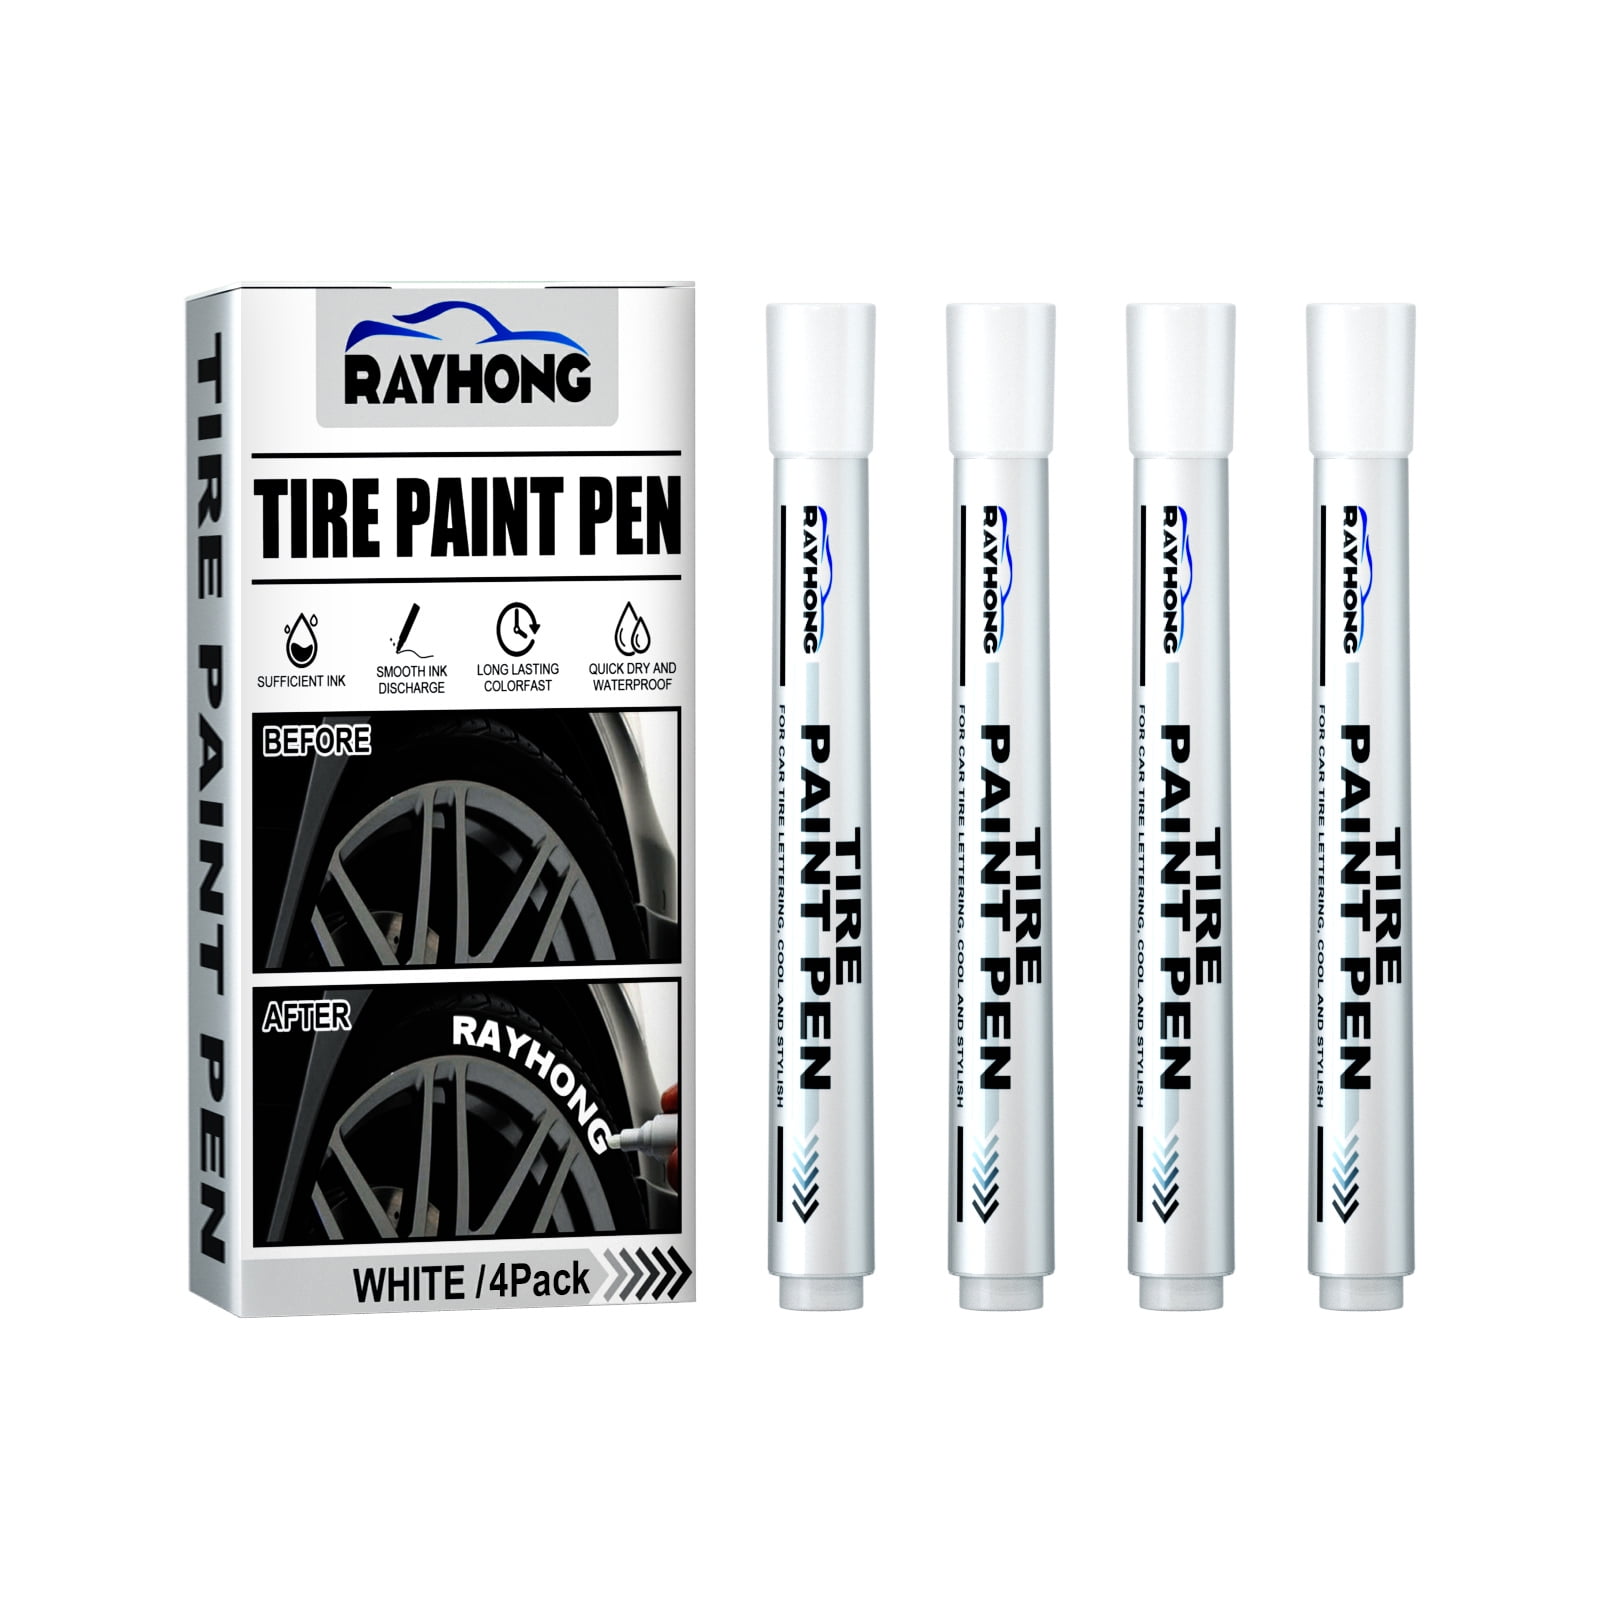 crgreet White Tire Paint Markers for Car Tire Lettering-Permanent Tire Paint Pens Are Designed with Weatherproof Ink for Car Tires 4pcs